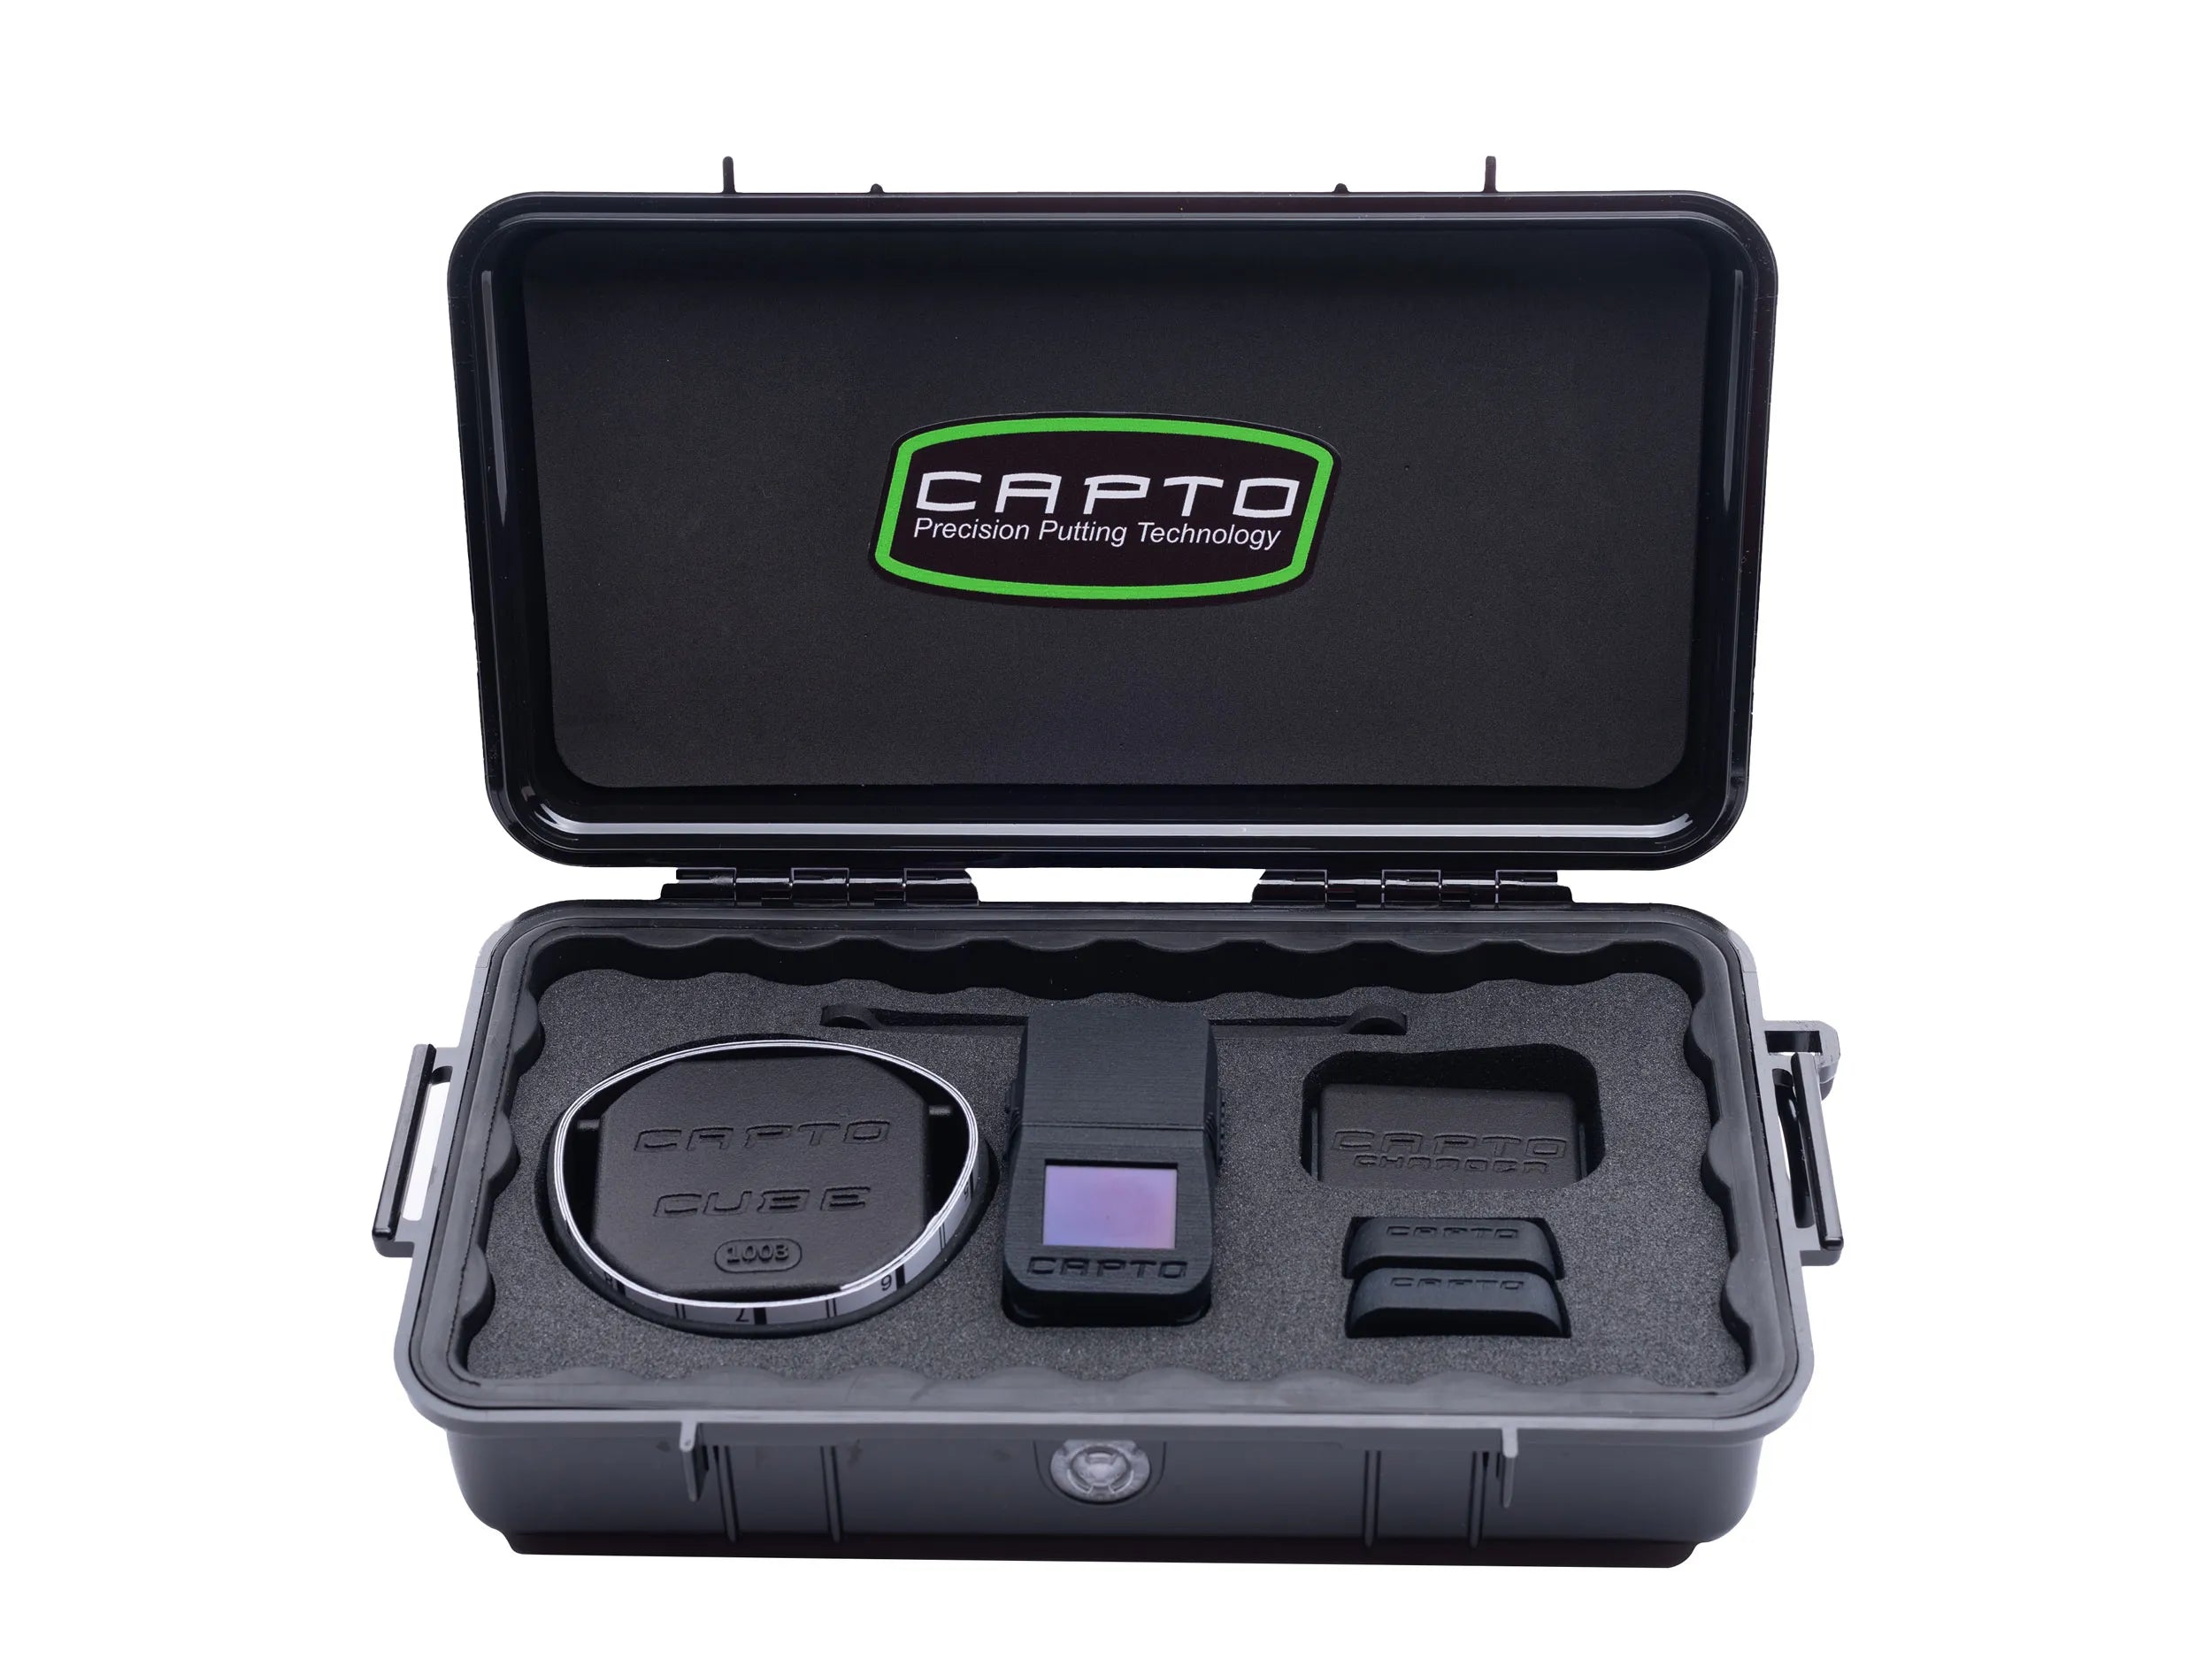 Capto Gen 3 carry case with all the products inside safely protected by foam